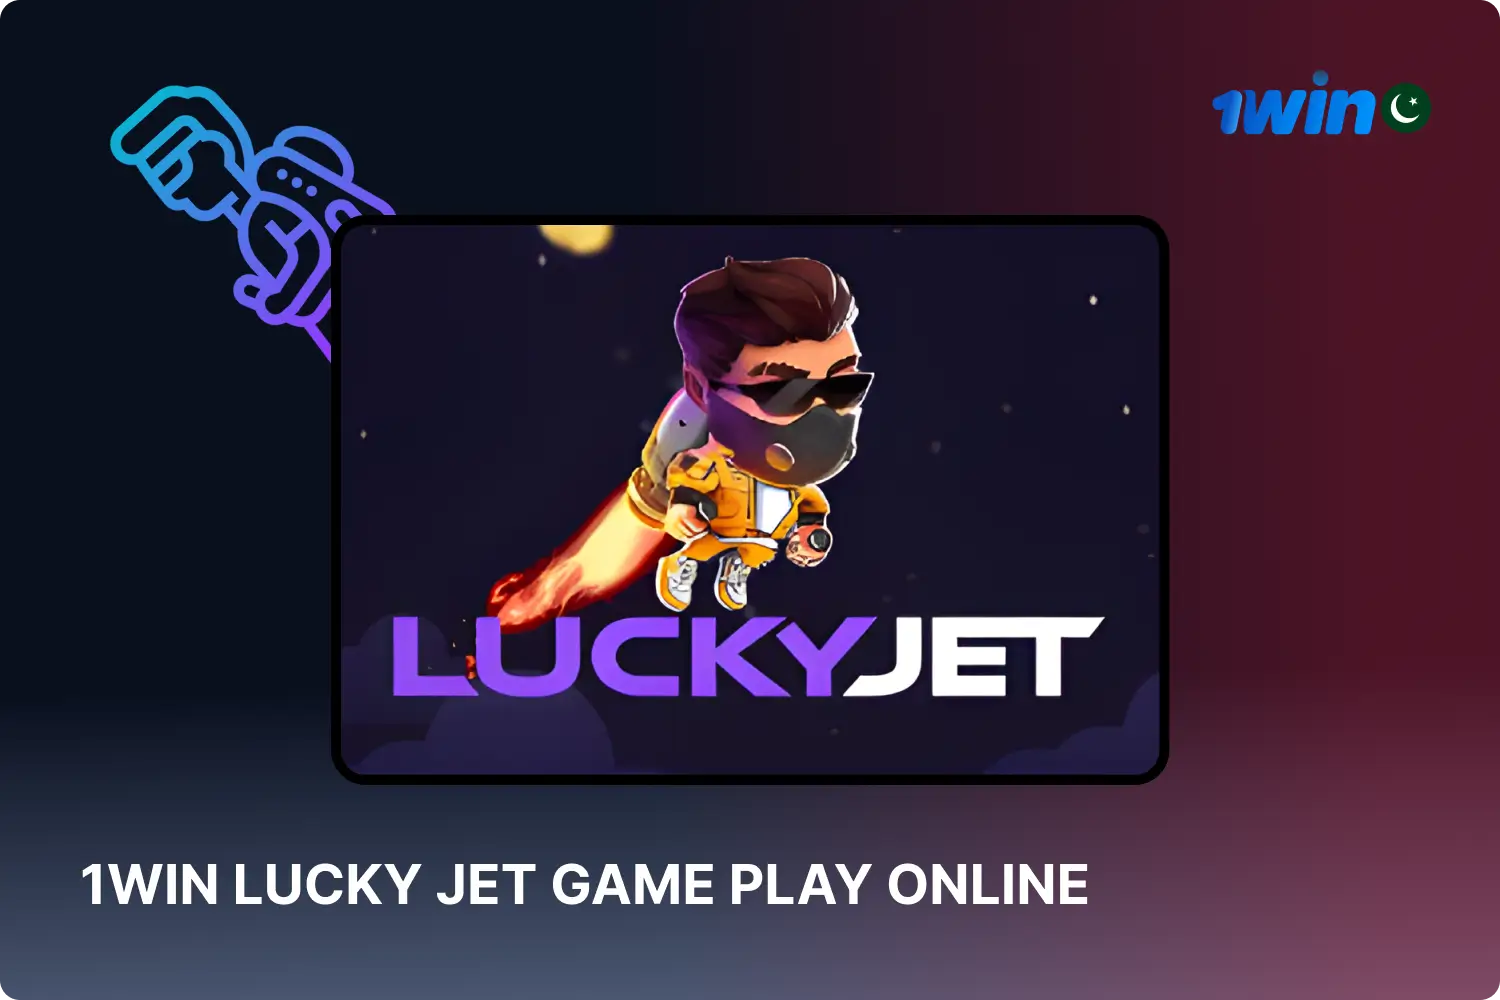 Lucky Jet by 1win is a popular crash game with a high RTP that is especially popular among players from Pakistan